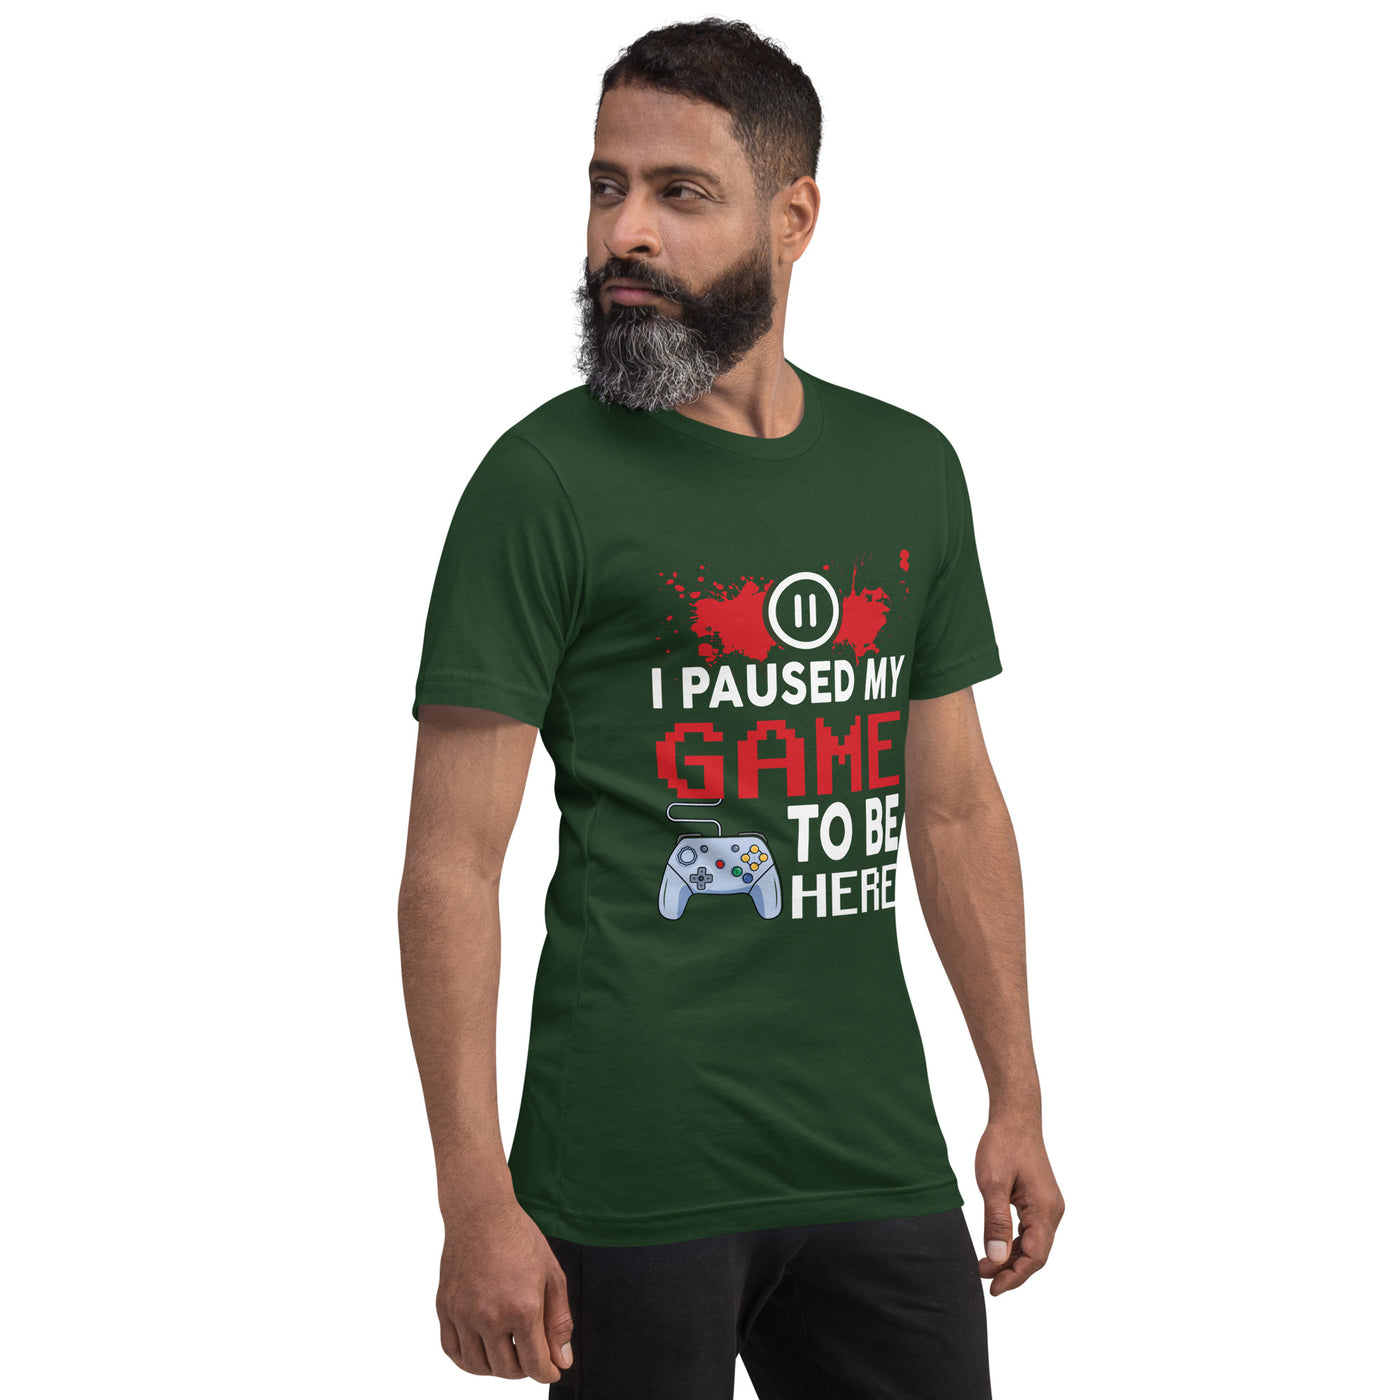 I Paused my Game to be here ( red pixelated text ) - Unisex t-shirt